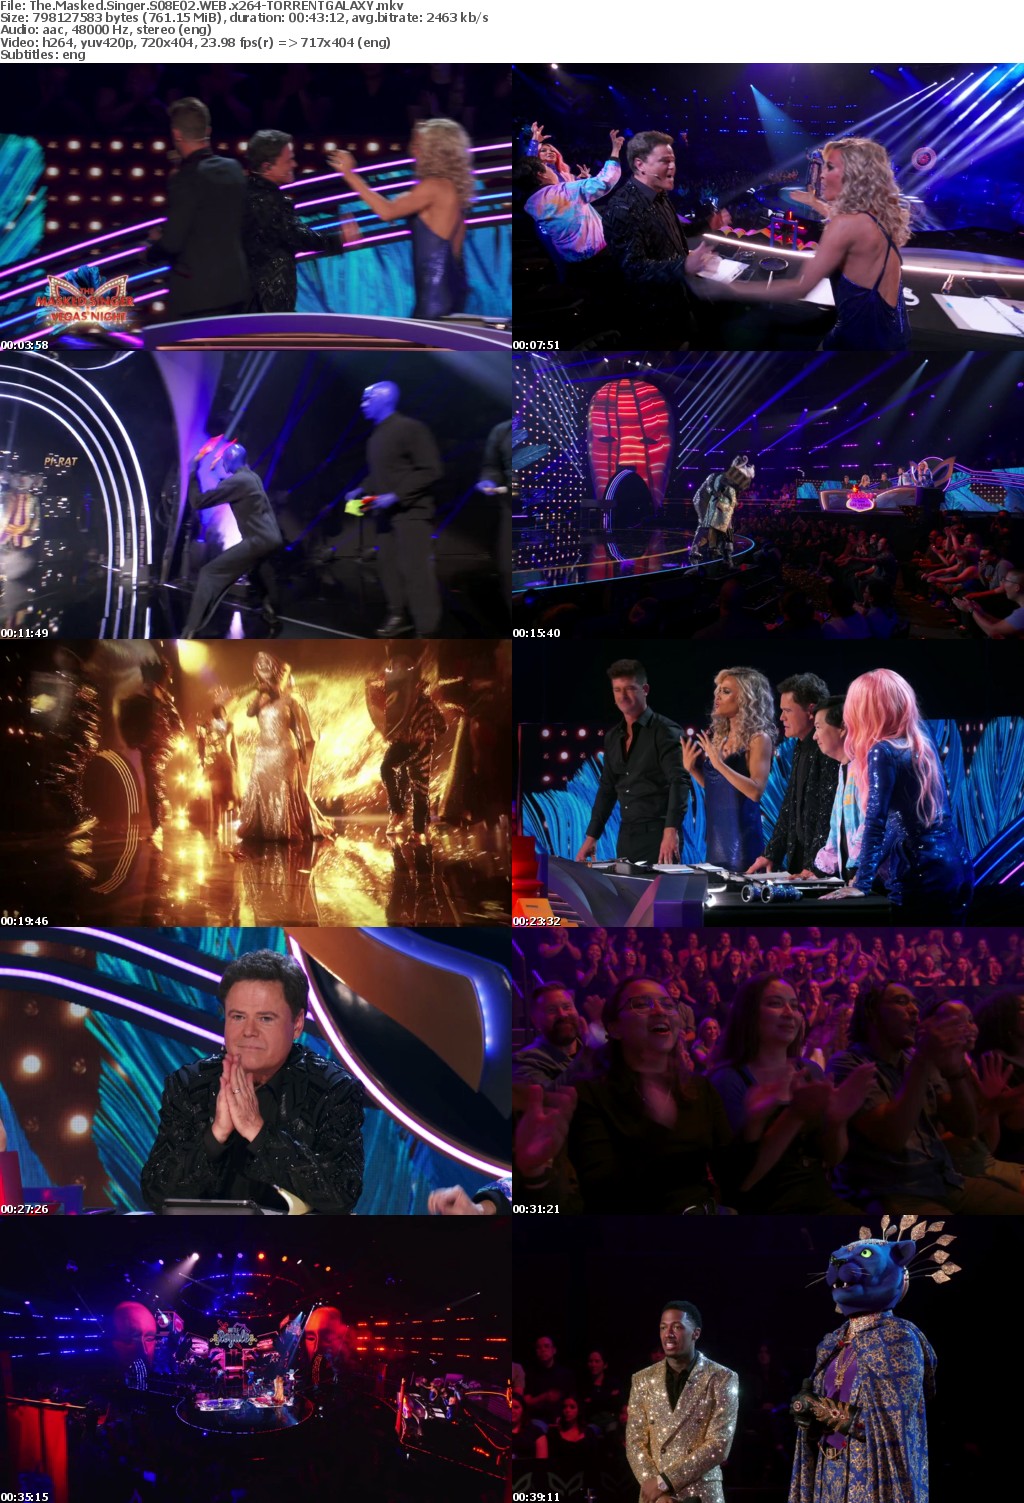 The Masked Singer S08E02 WEB x264-GALAXY